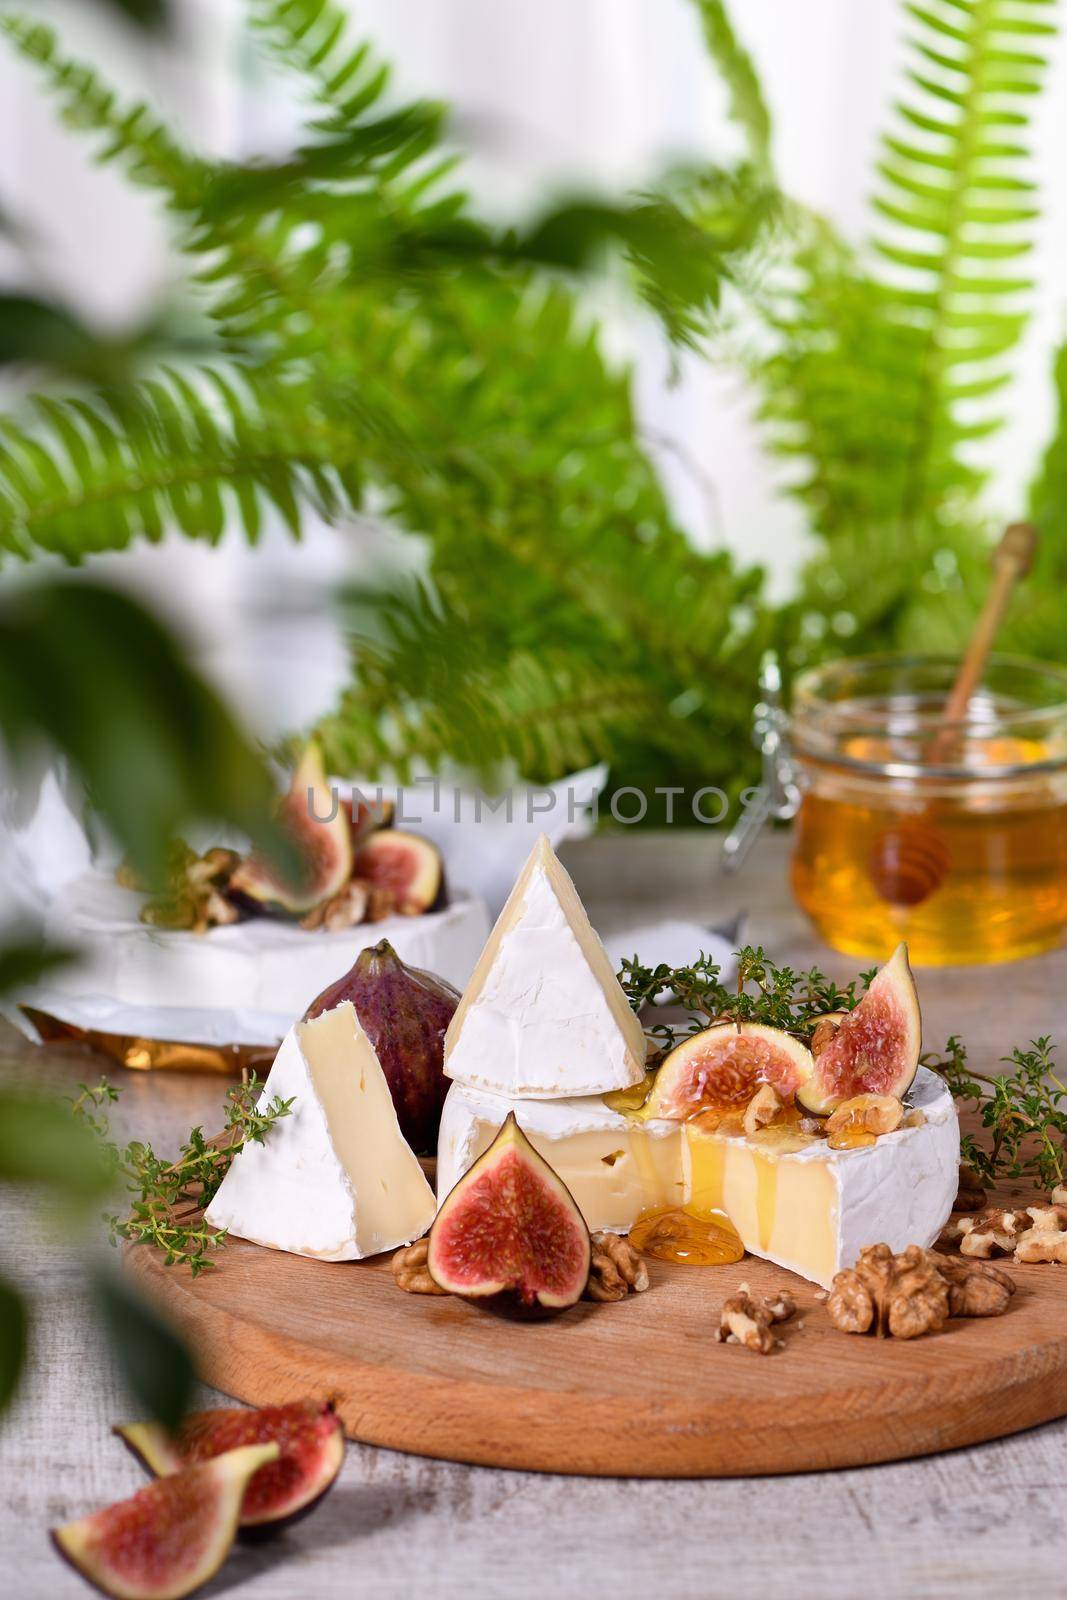 Brie cheese with honey and figs by Apolonia